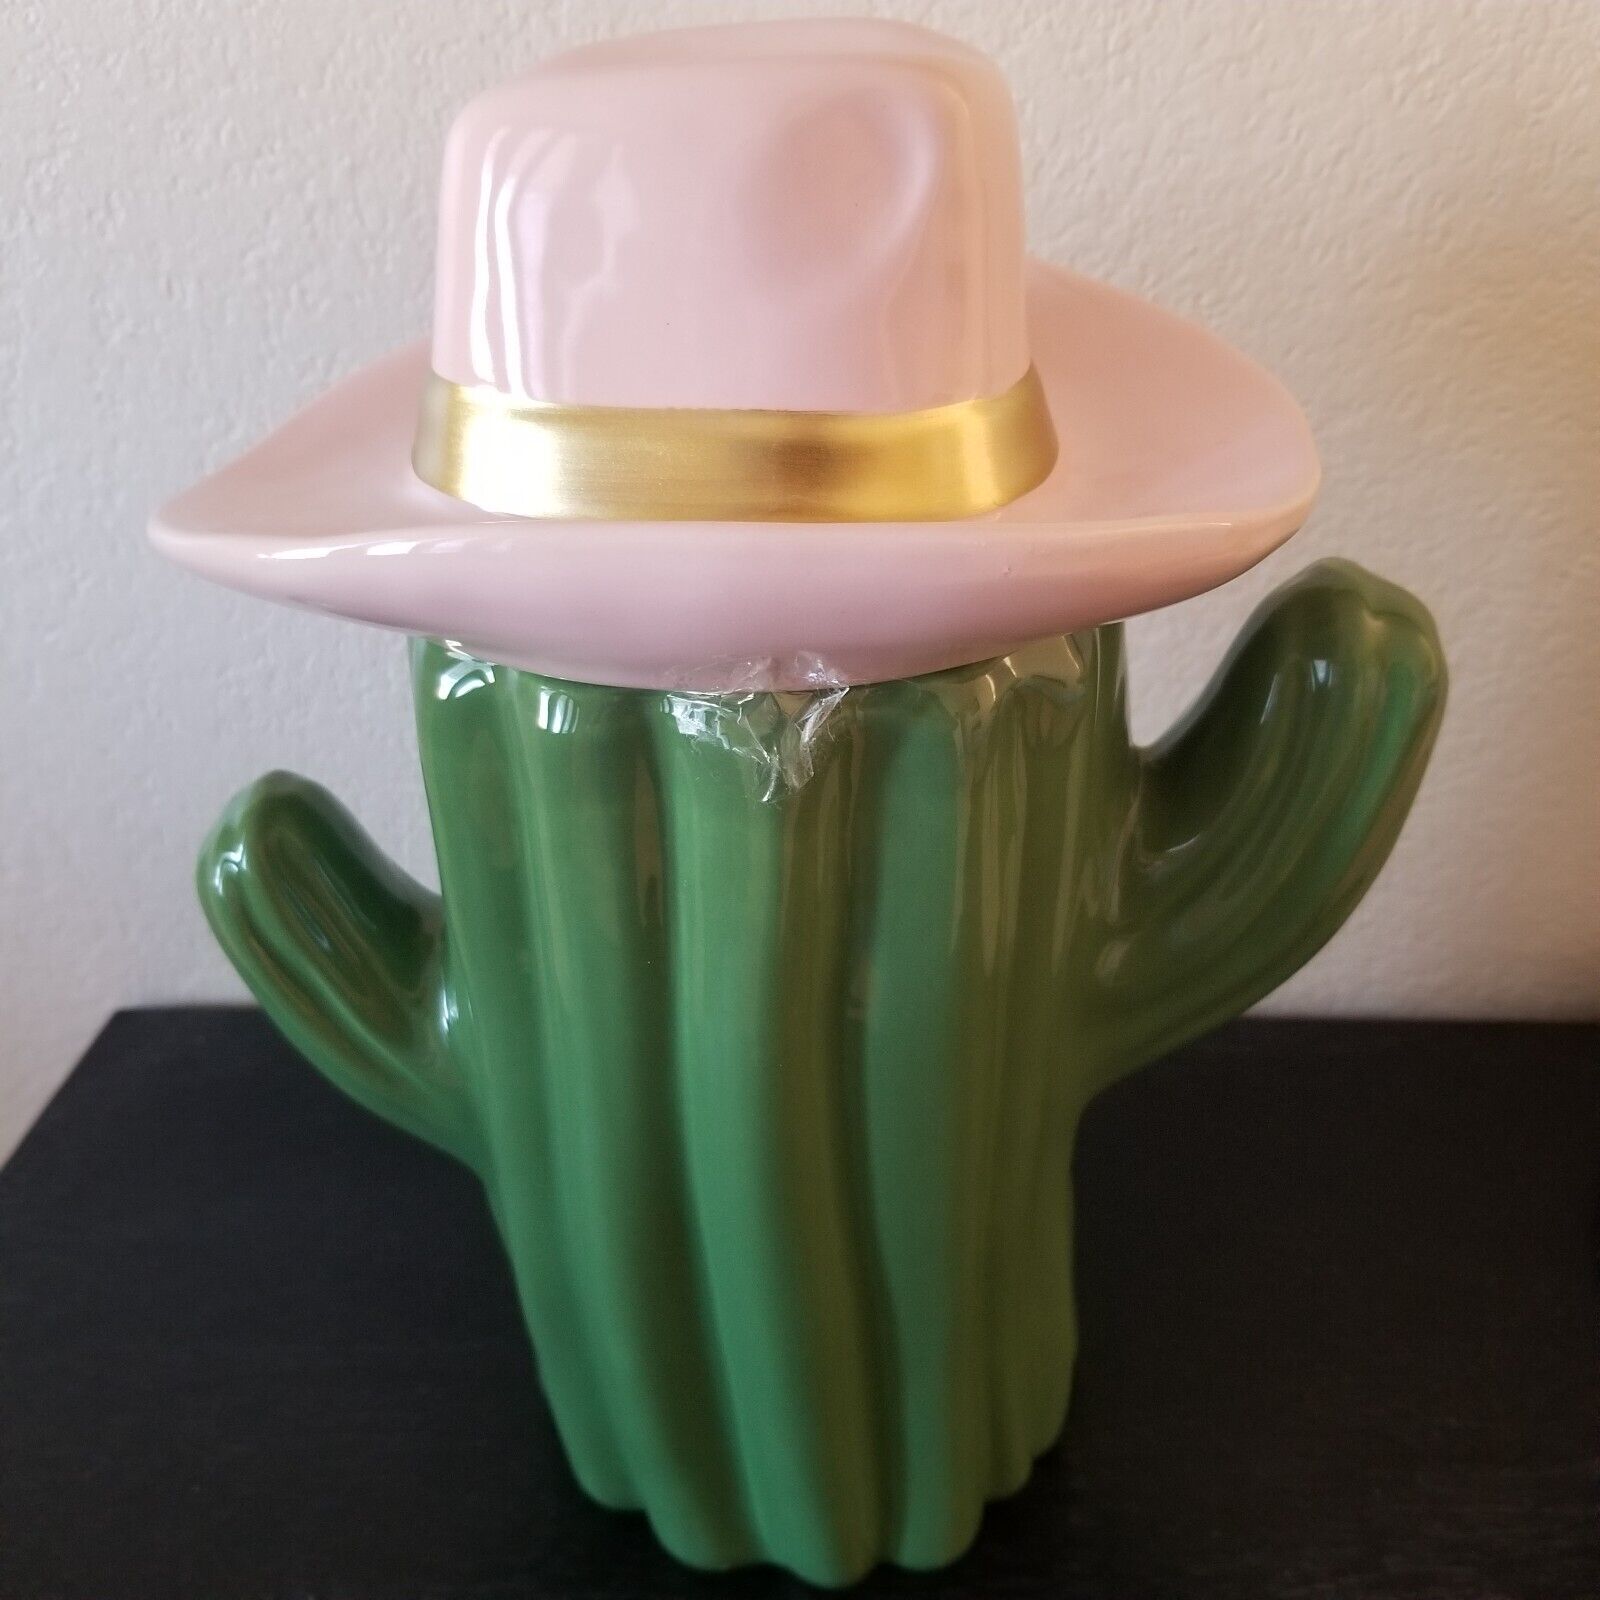 Cutest Cookie Jar Pink Cowgirl Cowboy hat CACTUS, Country Western, unique NEW